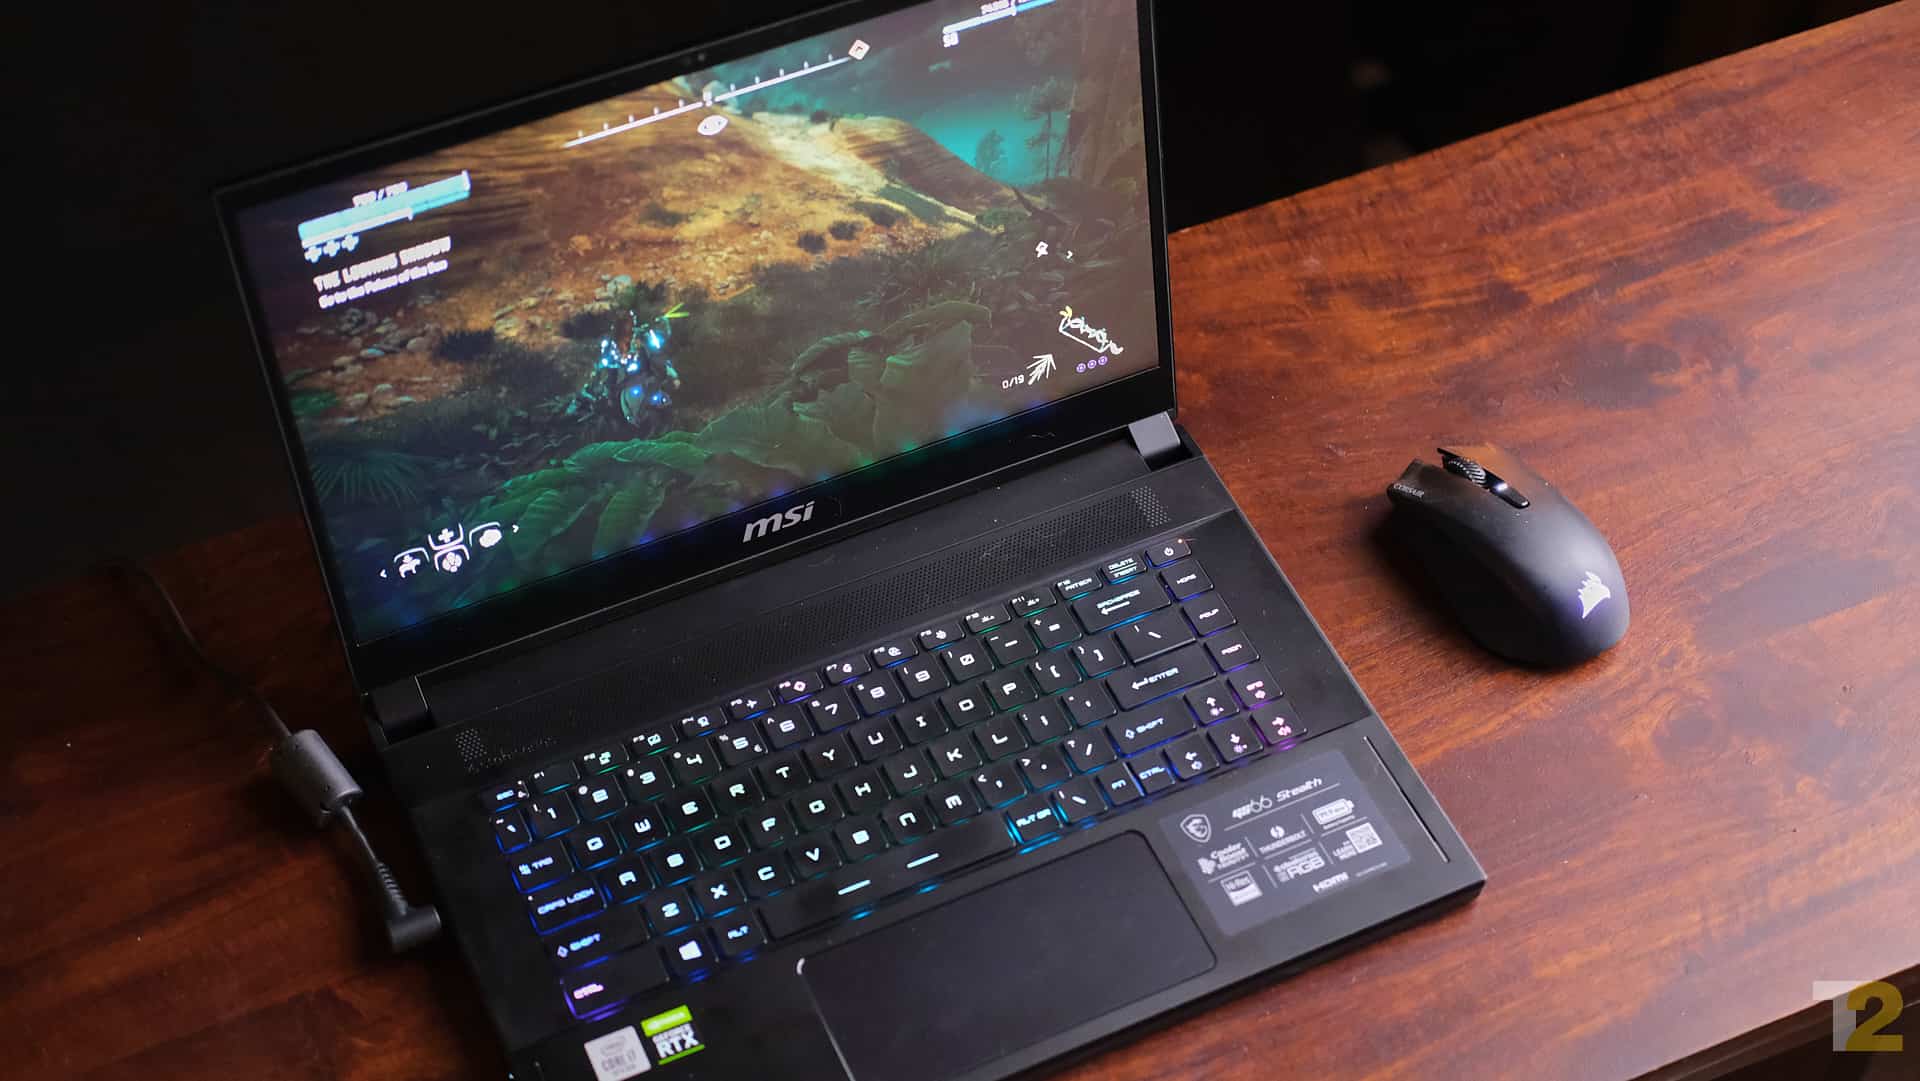 This year’s MSI GS66 goes for a stealthier, all-black look that does work, but I prefer the muted gold accents of 2018’s GS65 variant. Performance is also not as exciting this time around. Image: Anirudh Regidi